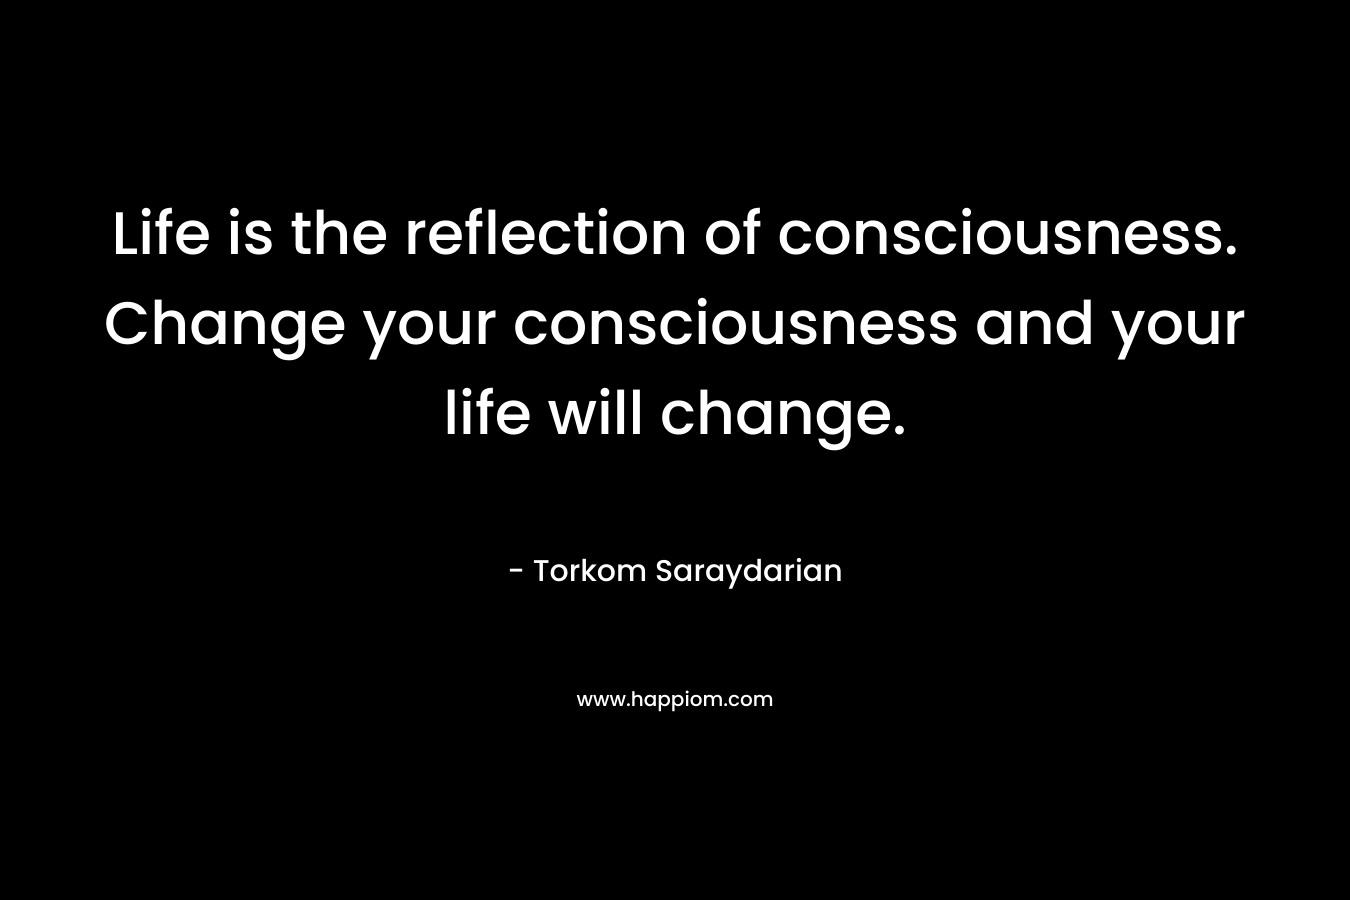 Life is the reflection of consciousness. Change your consciousness and your life will change.